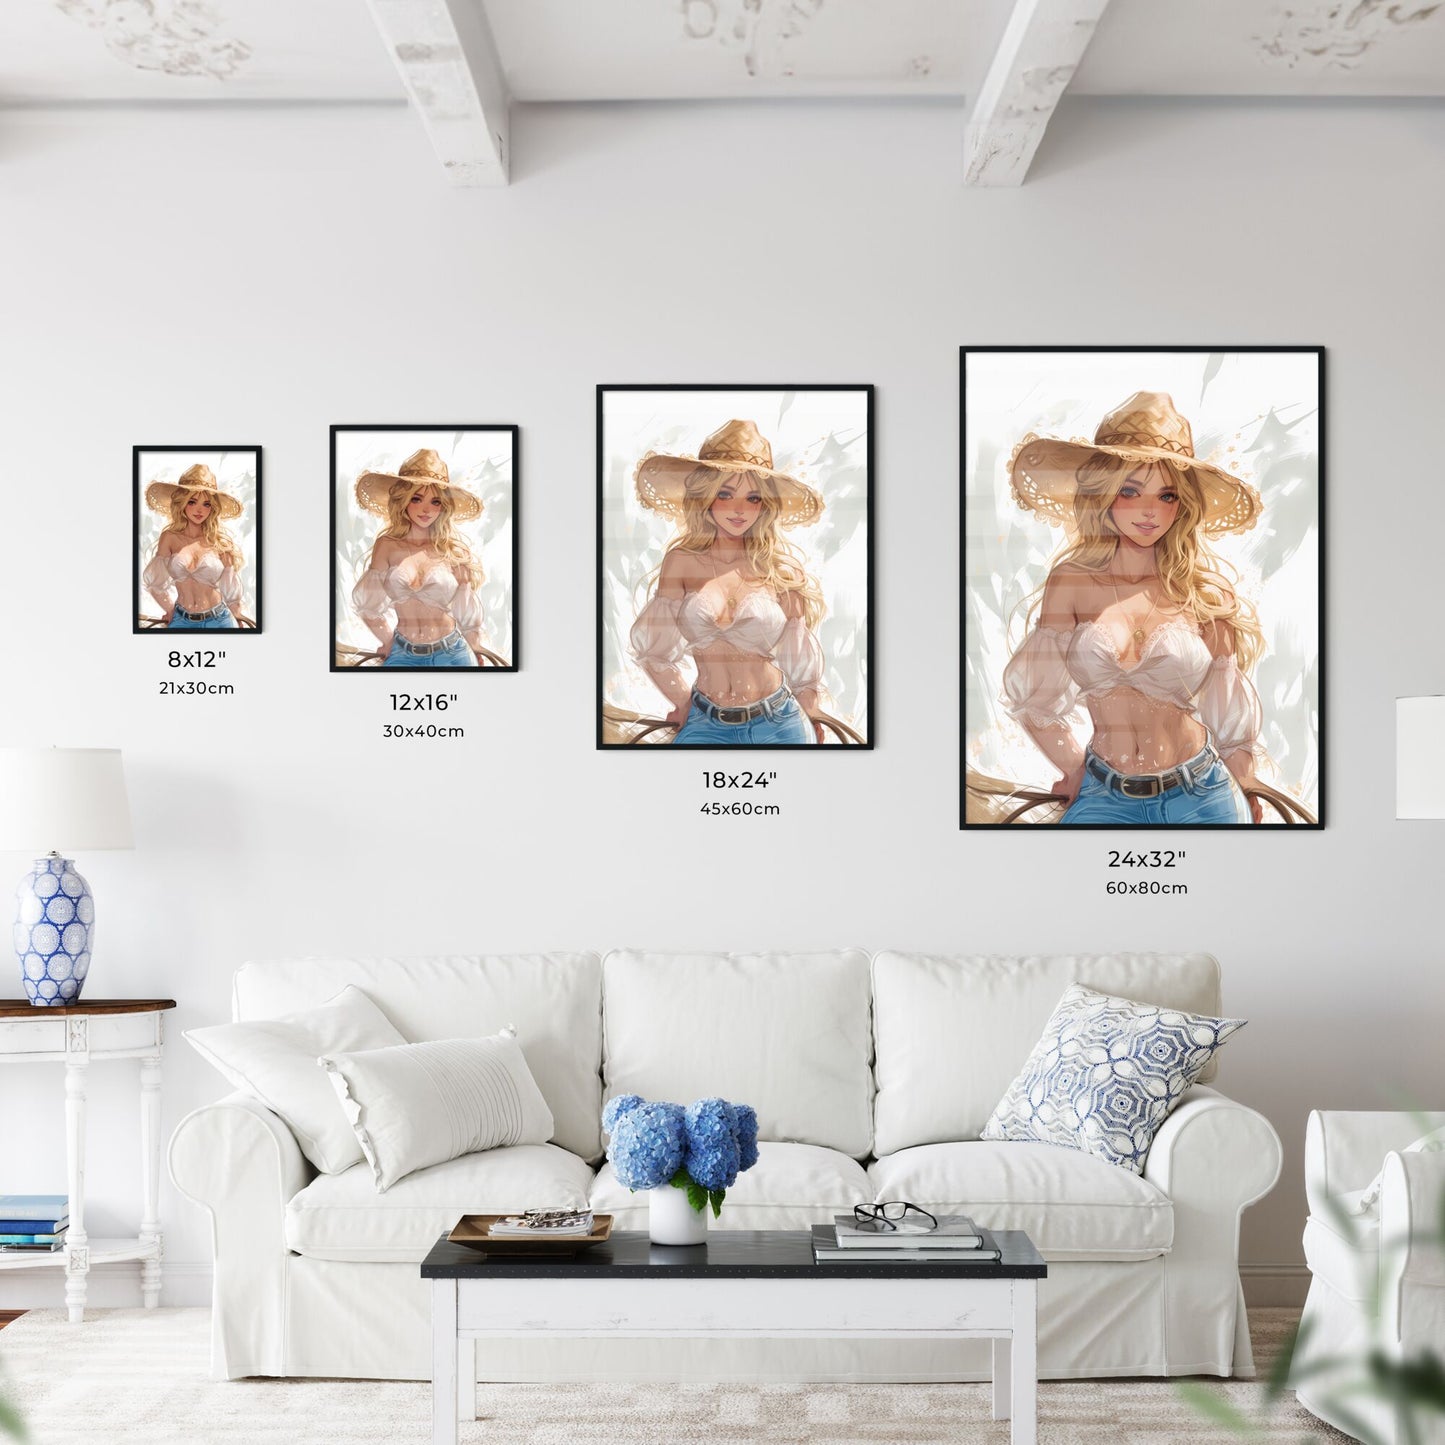 Cowgirl - Art print of a woman wearing a straw hat Default Title